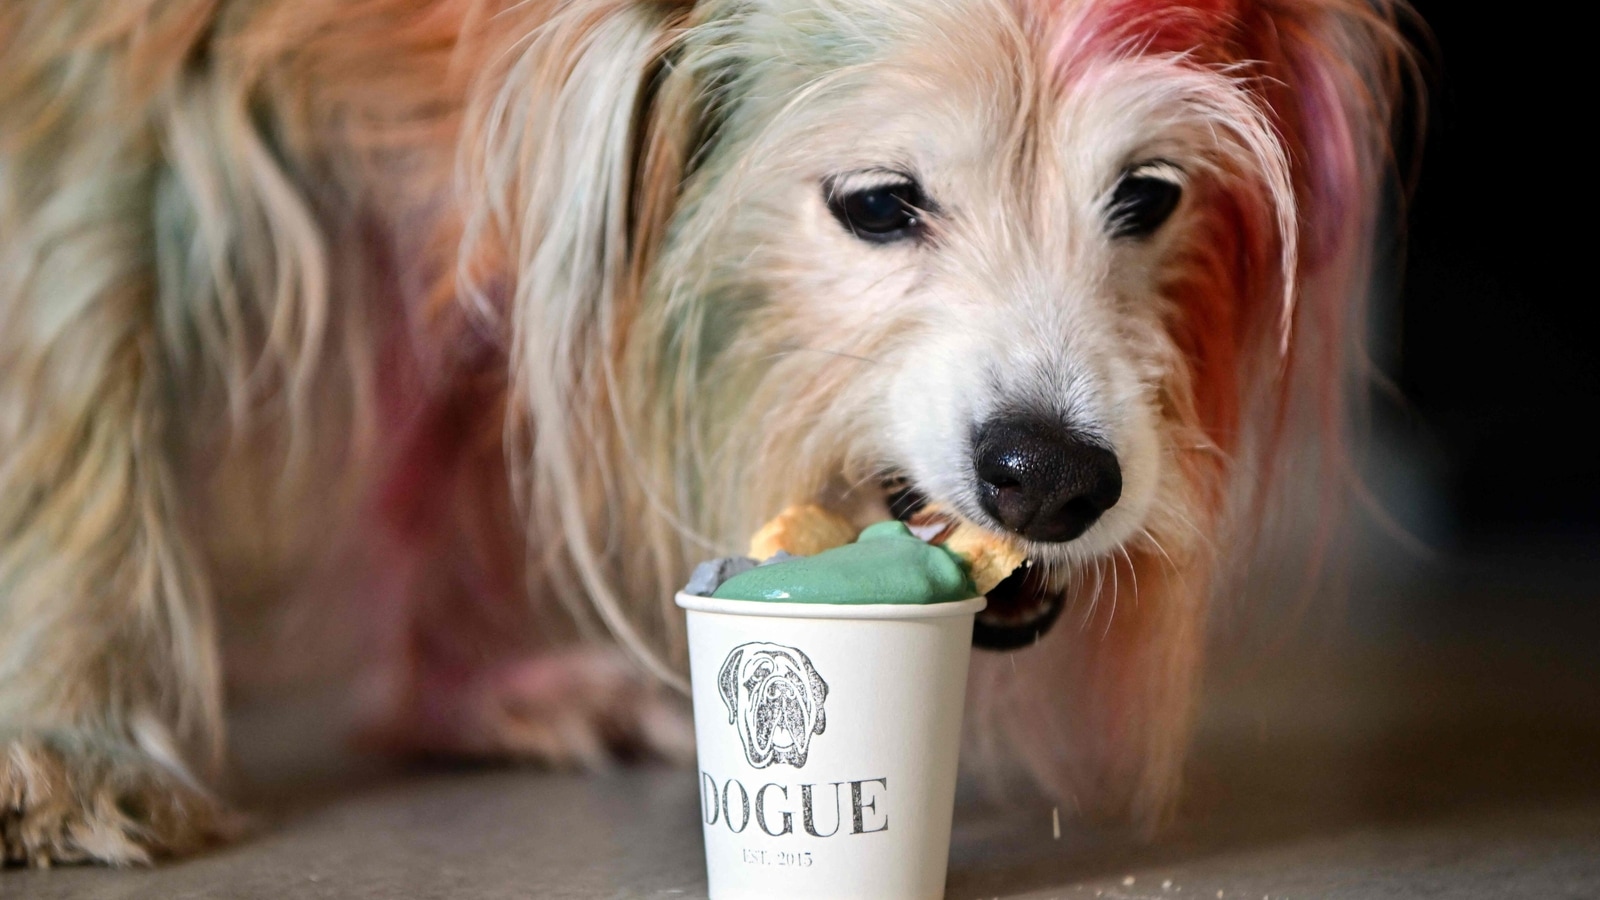 haute-dog-cuisine-us-restaurant-caters-to-canine-gourmets